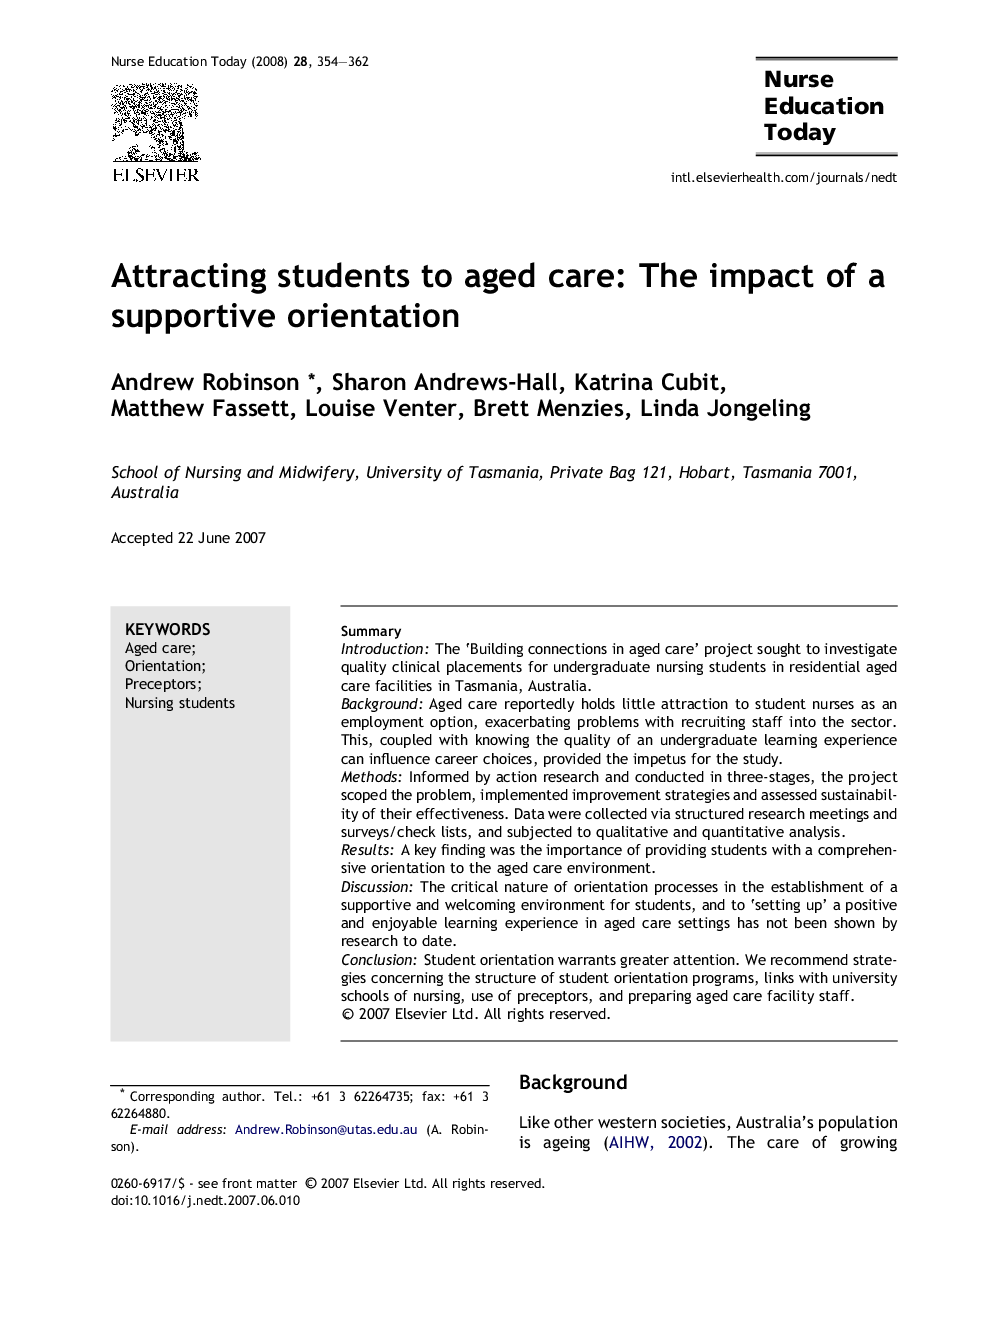 Attracting students to aged care: The impact of a supportive orientation